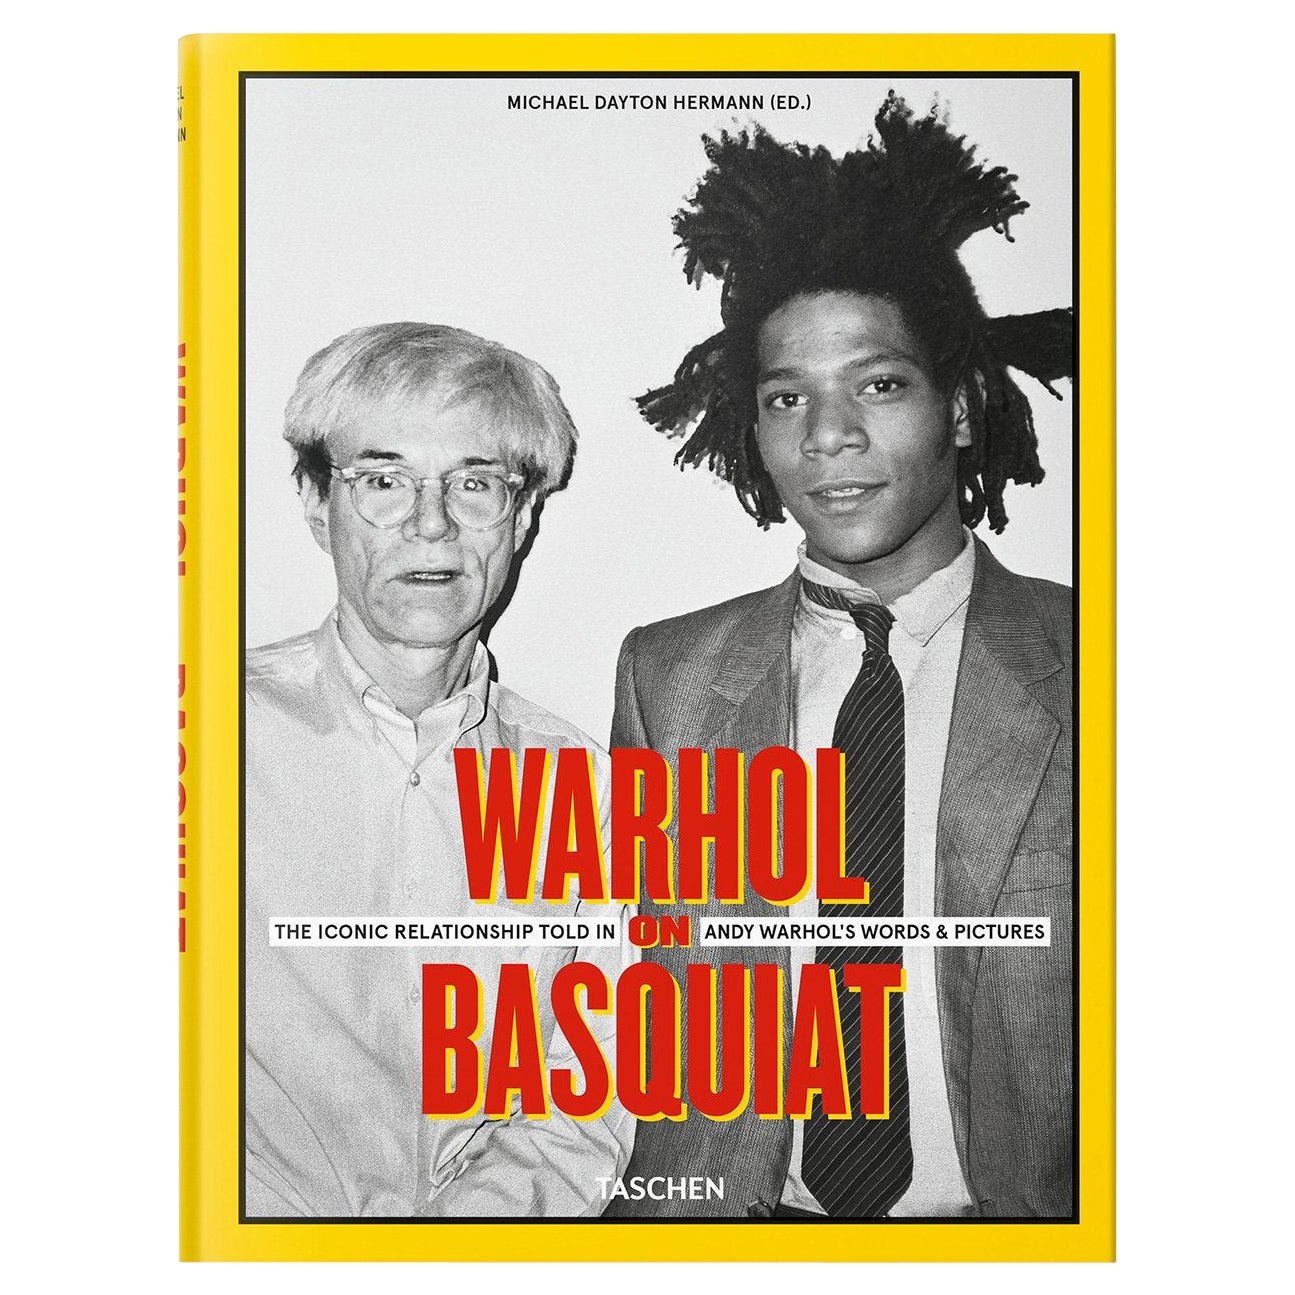 Warhol on Basquiat, the Iconic Relationship Told in Andy Warhol’s Words. Book